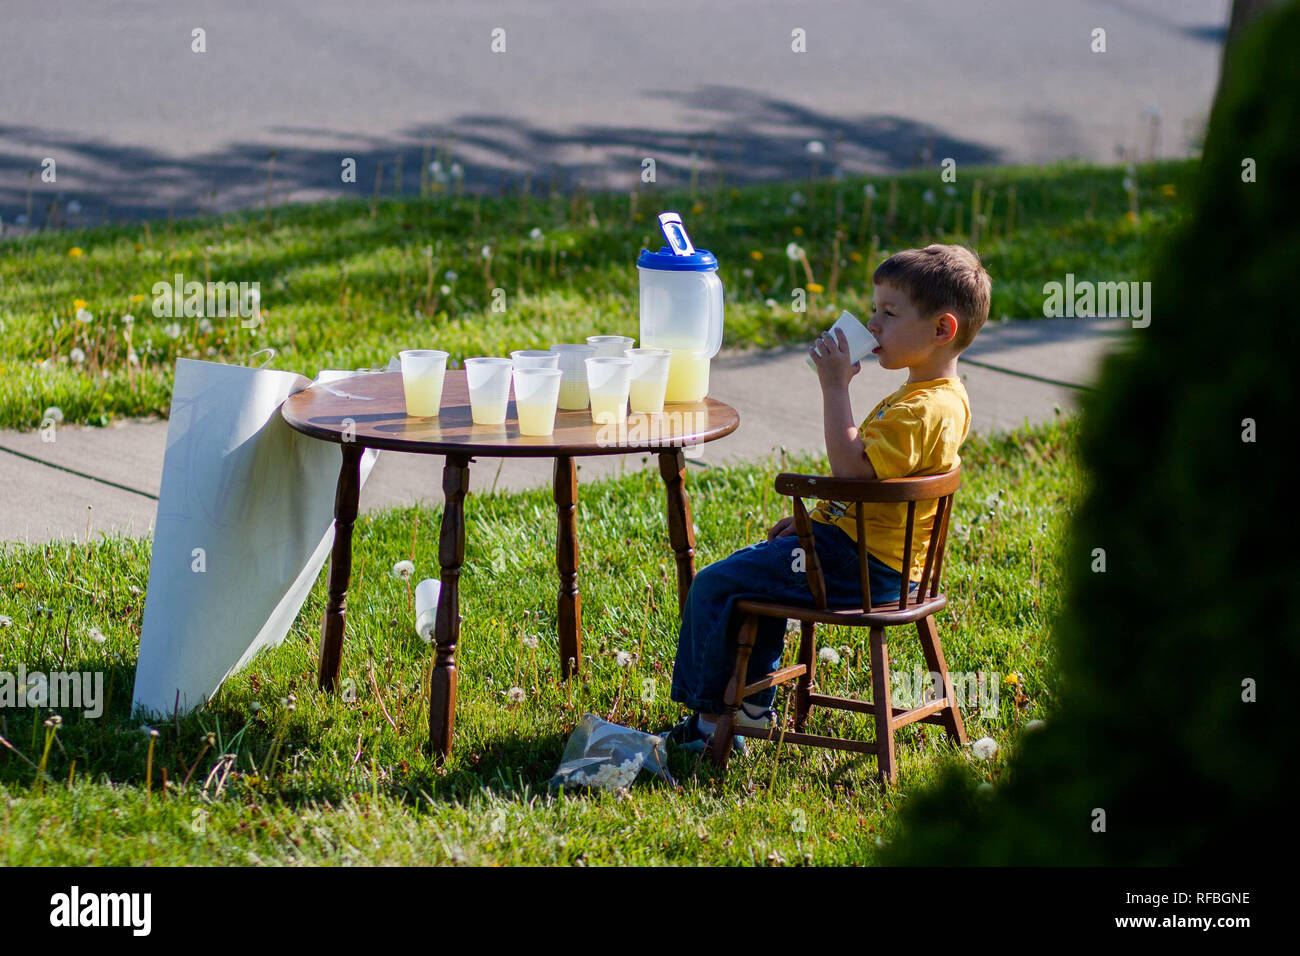 A 5-year old boy sits at a lemonade stand with cups and a pitcher of  lemonade Stock Photo - Alamy